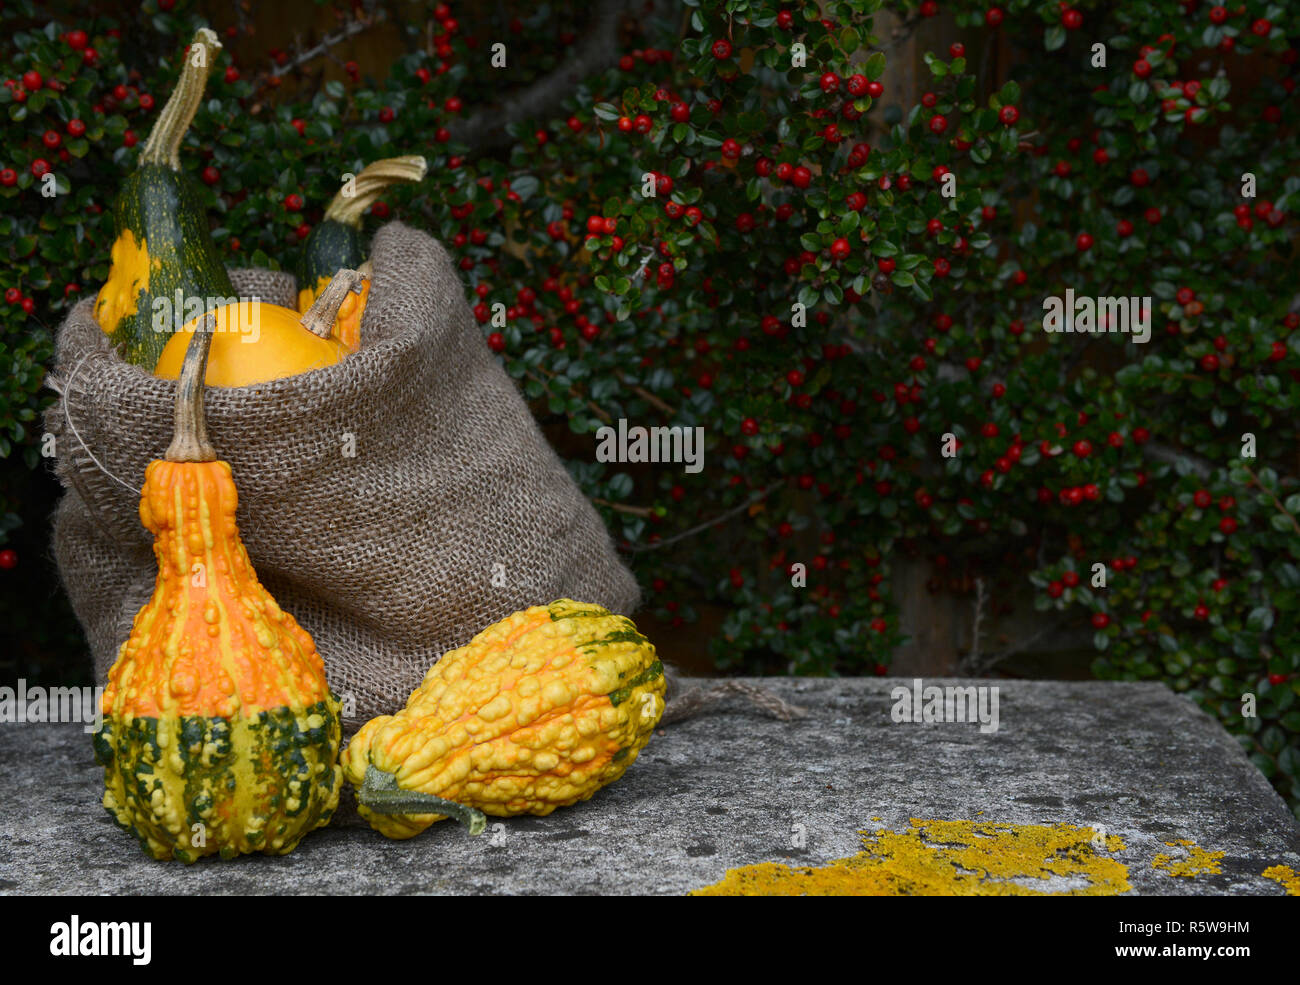 Burlap sack of ornamental gourds and warty squashes Stock Photo